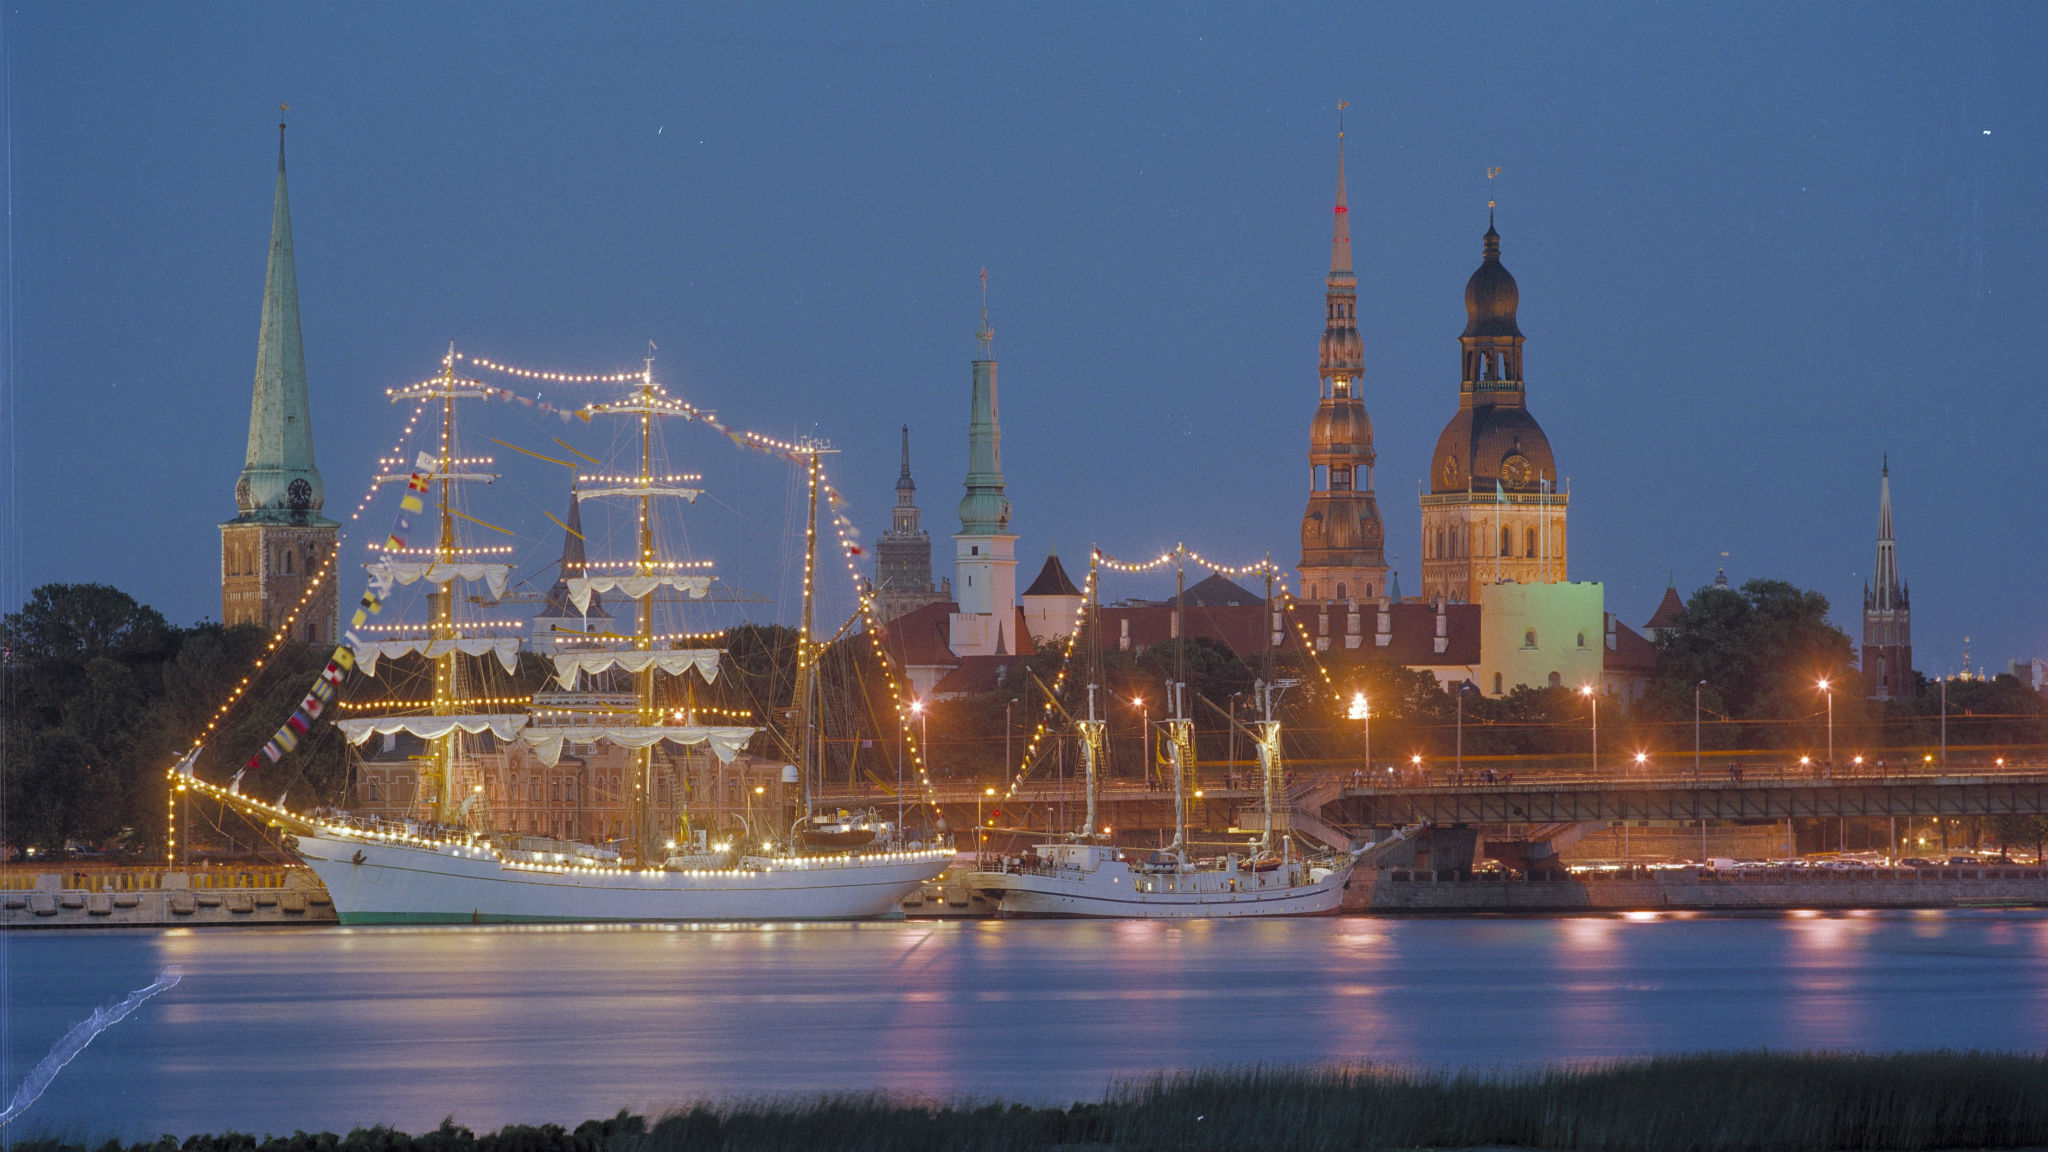 Amazing Riga Pictures & Backgrounds